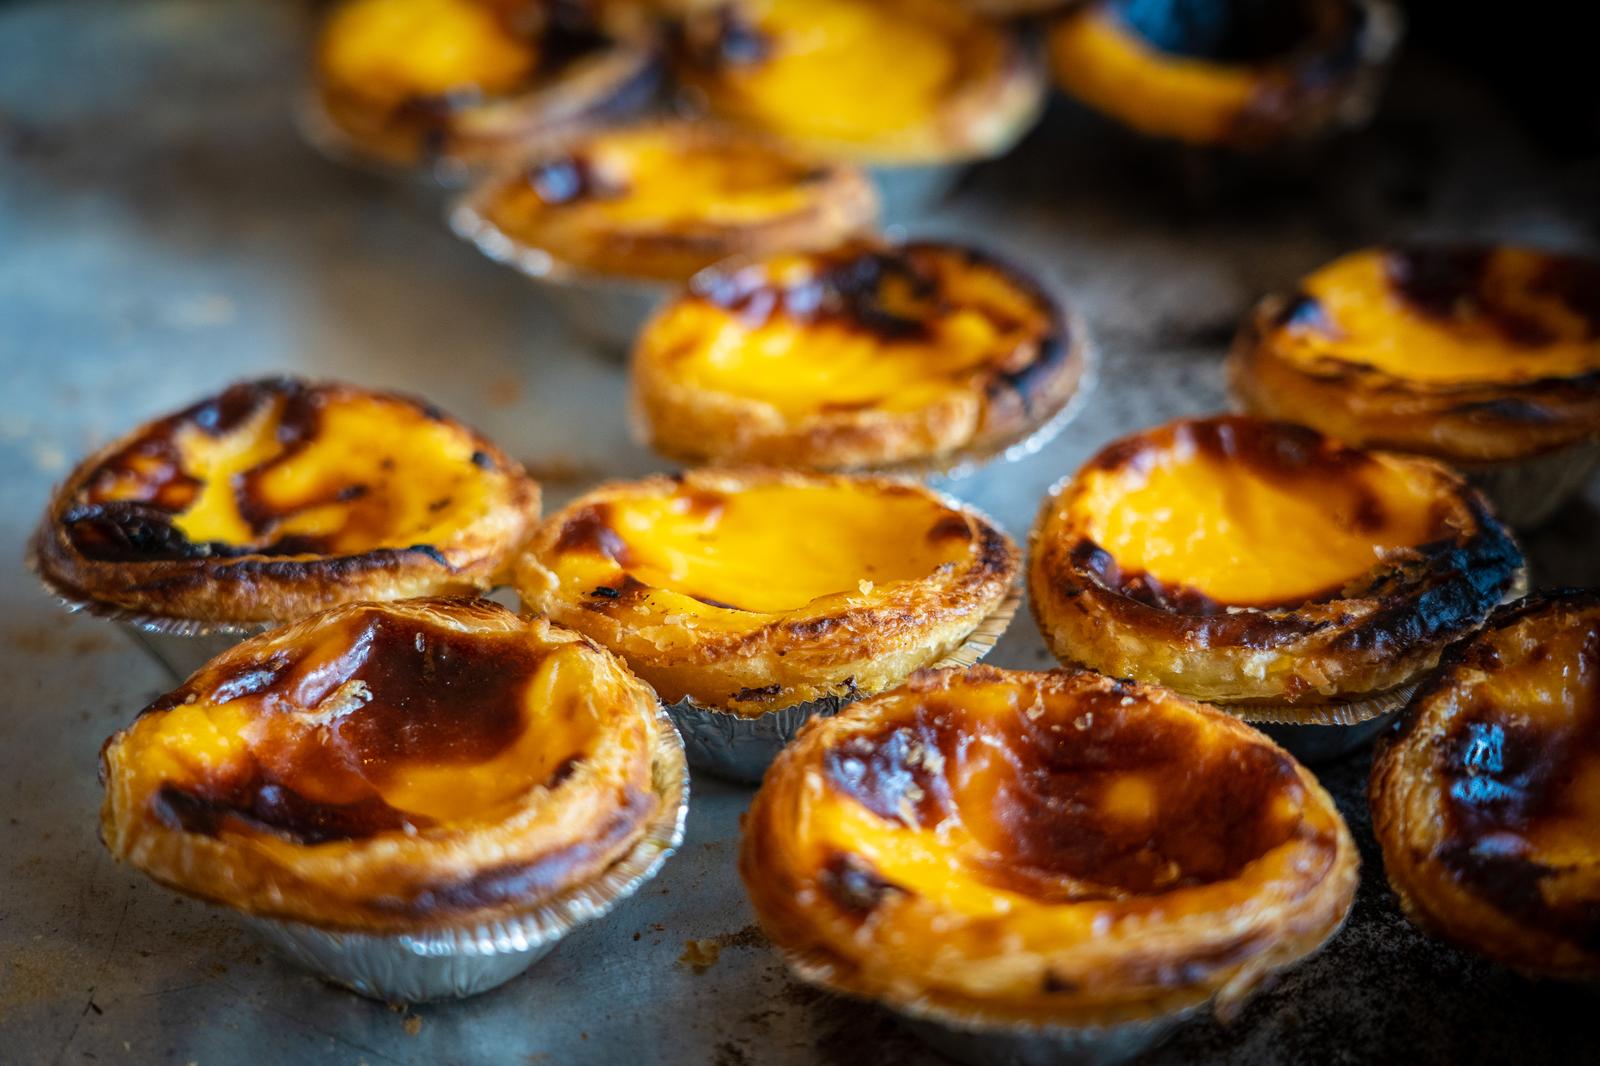 Eat at a Global Food Extravaganza to Determine the Season That Best Represents You Portuguese egg tarts cuisine